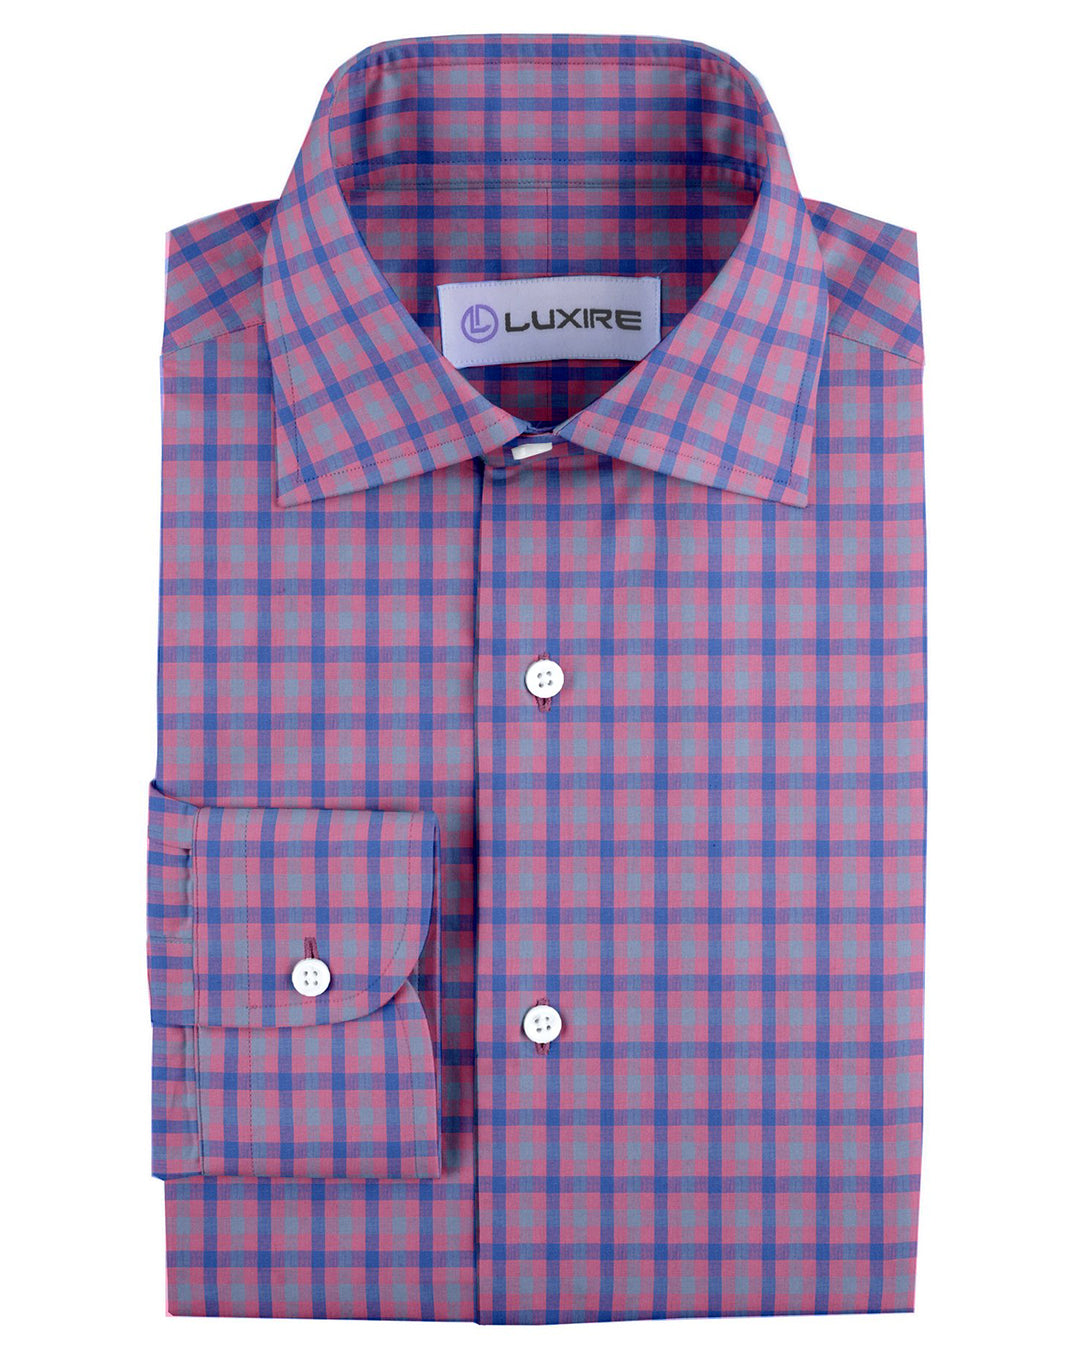 Front of the custom linen shirt for men in red gingham by Luxire Clothing